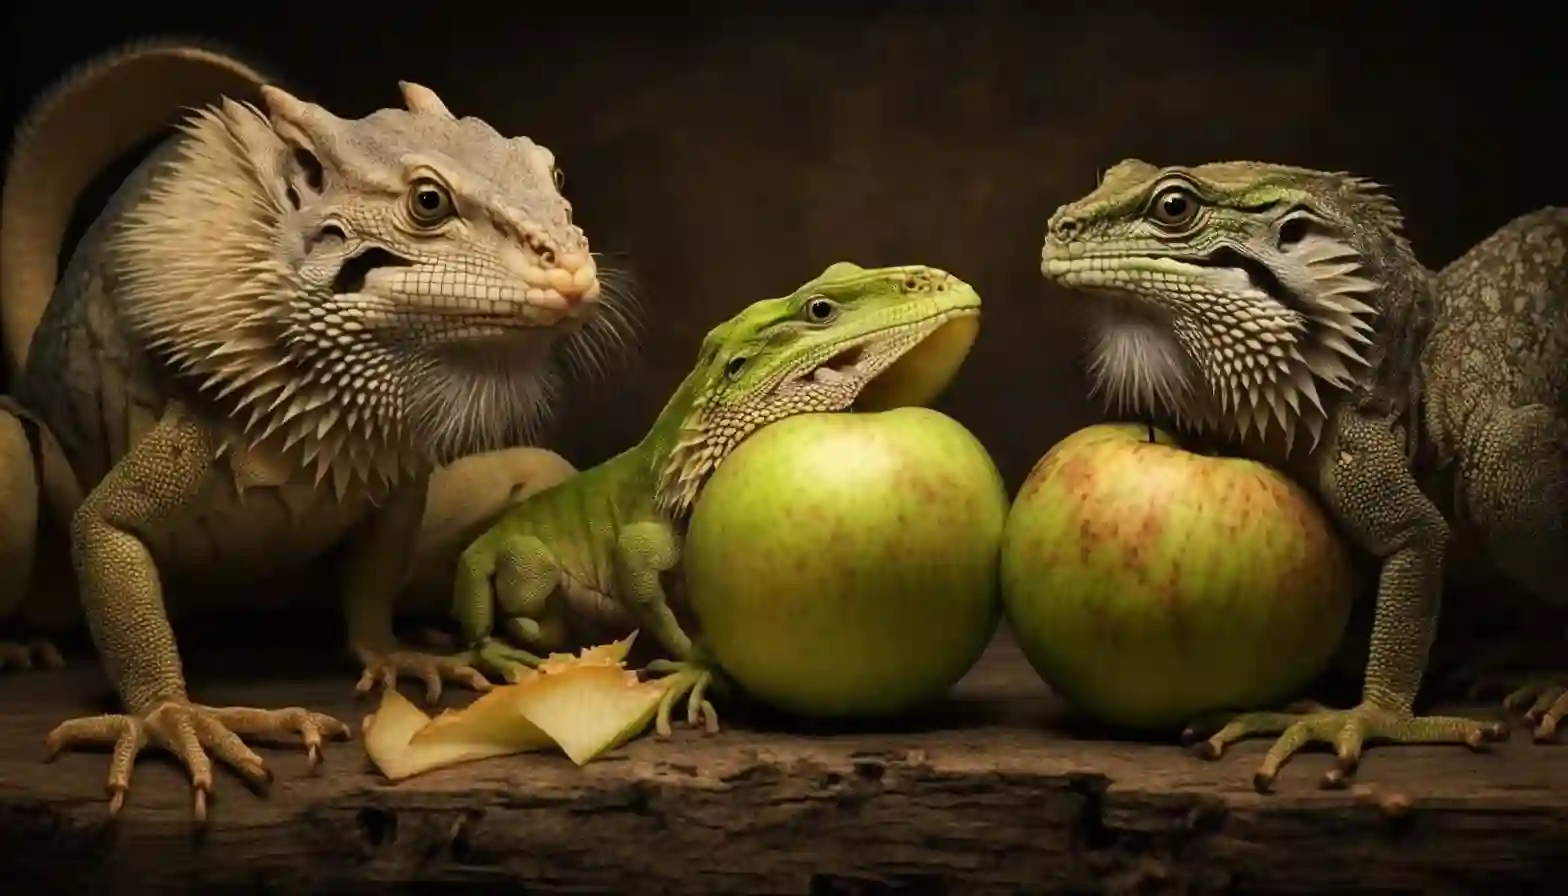 Can Bearded Dragons Eat Granny Smith Apples?